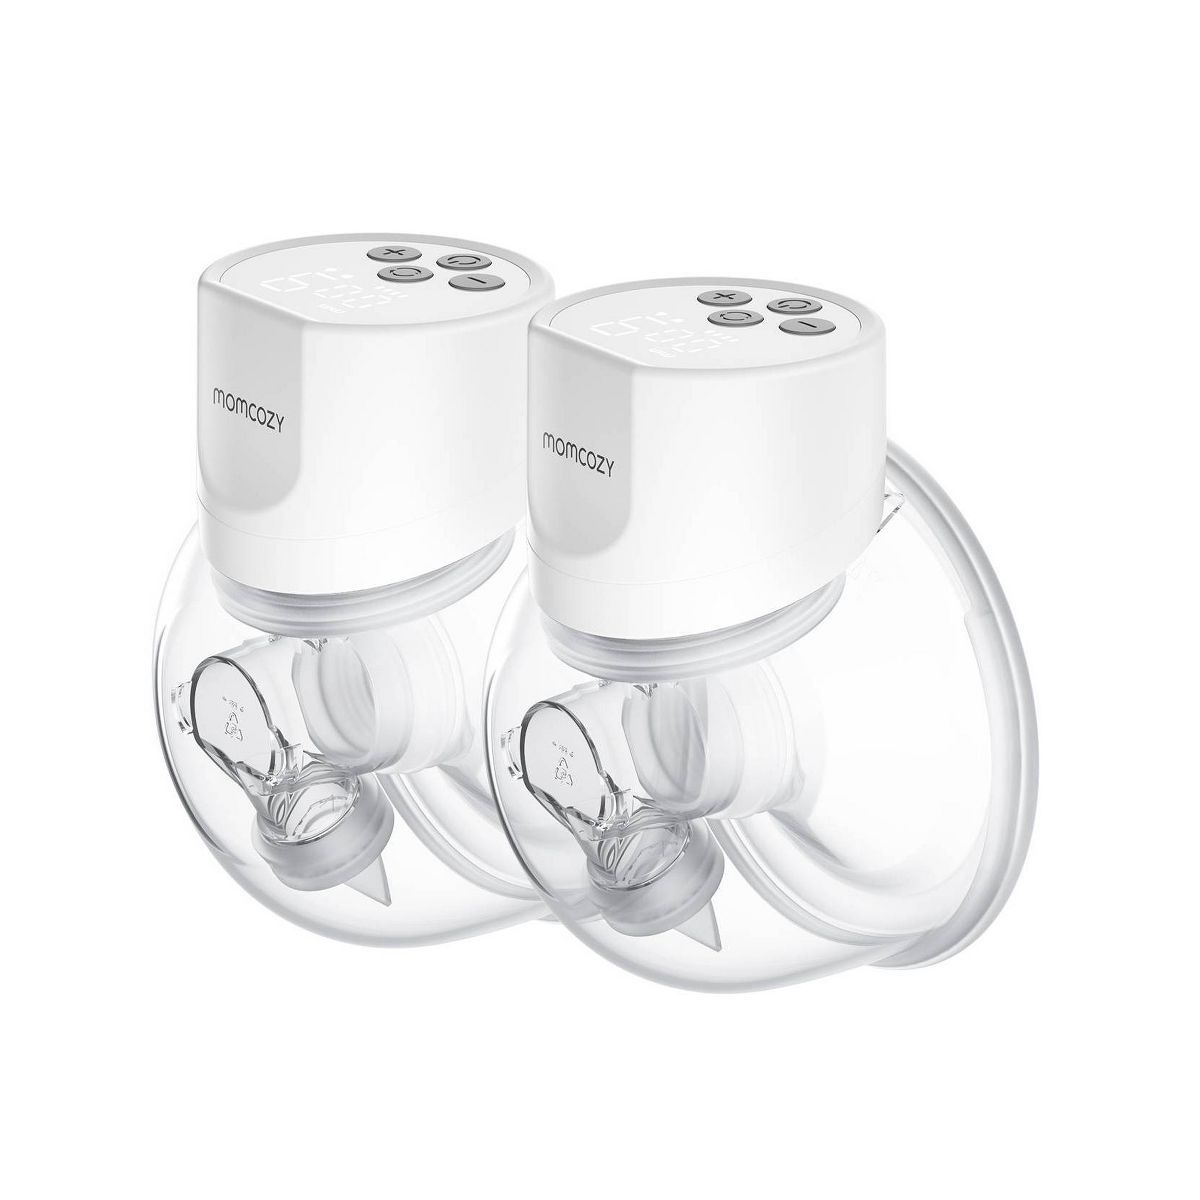 Momcozy Double S12 Pro-K Wearable Electric Breast Pump | Target